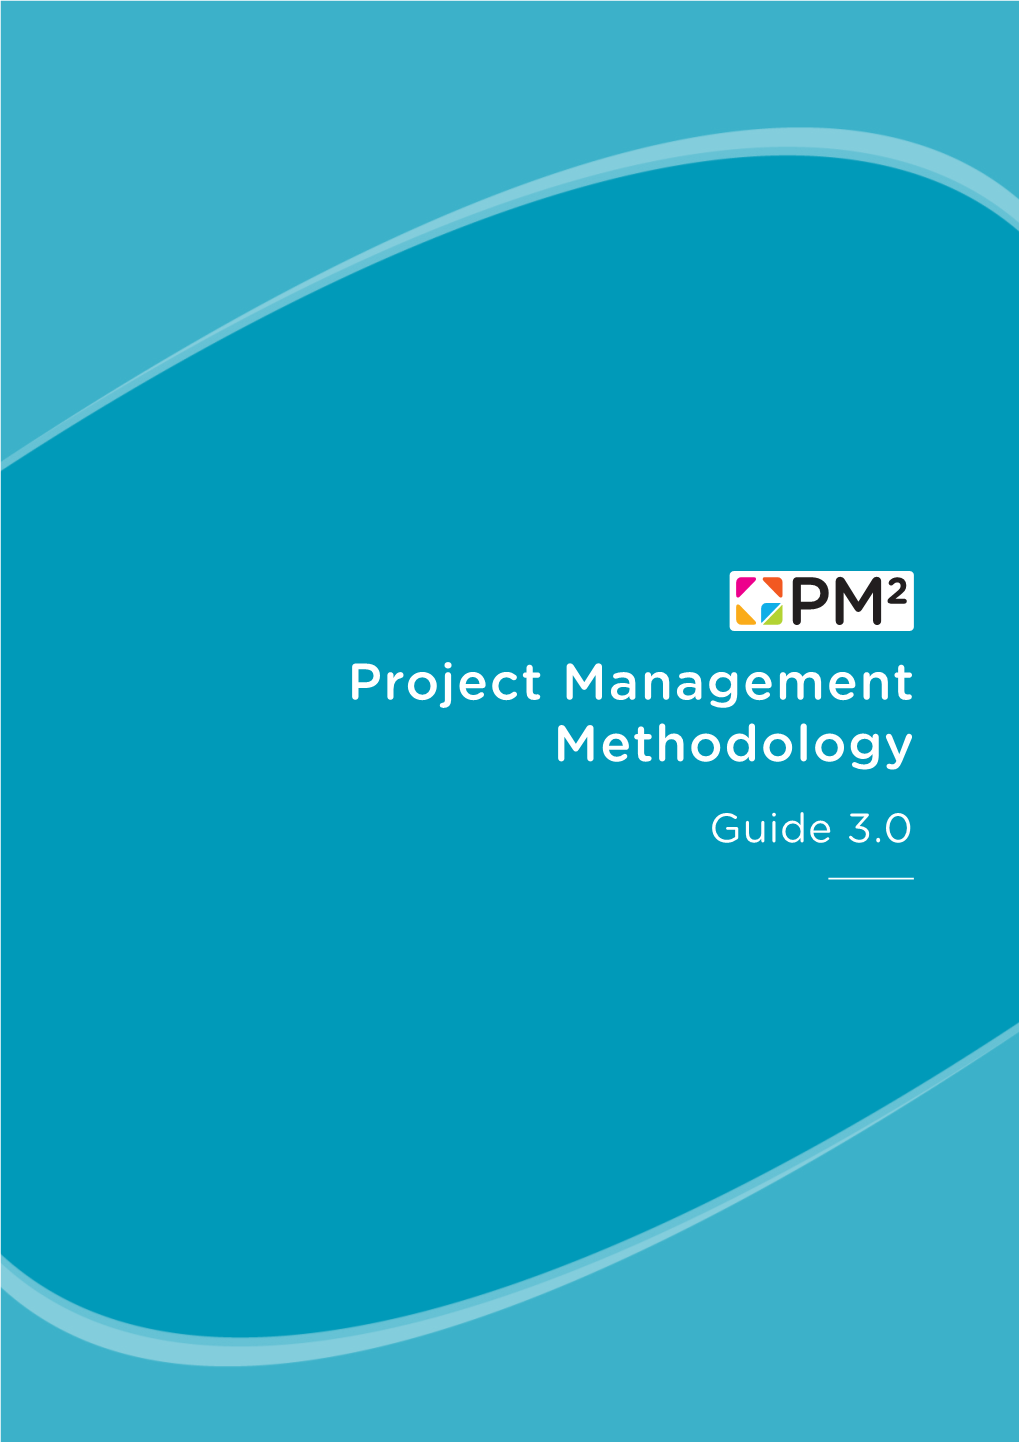 Project Management Methodology Guide 3.0 European Commission Centre of Excellence in Project Management (Coepm²)